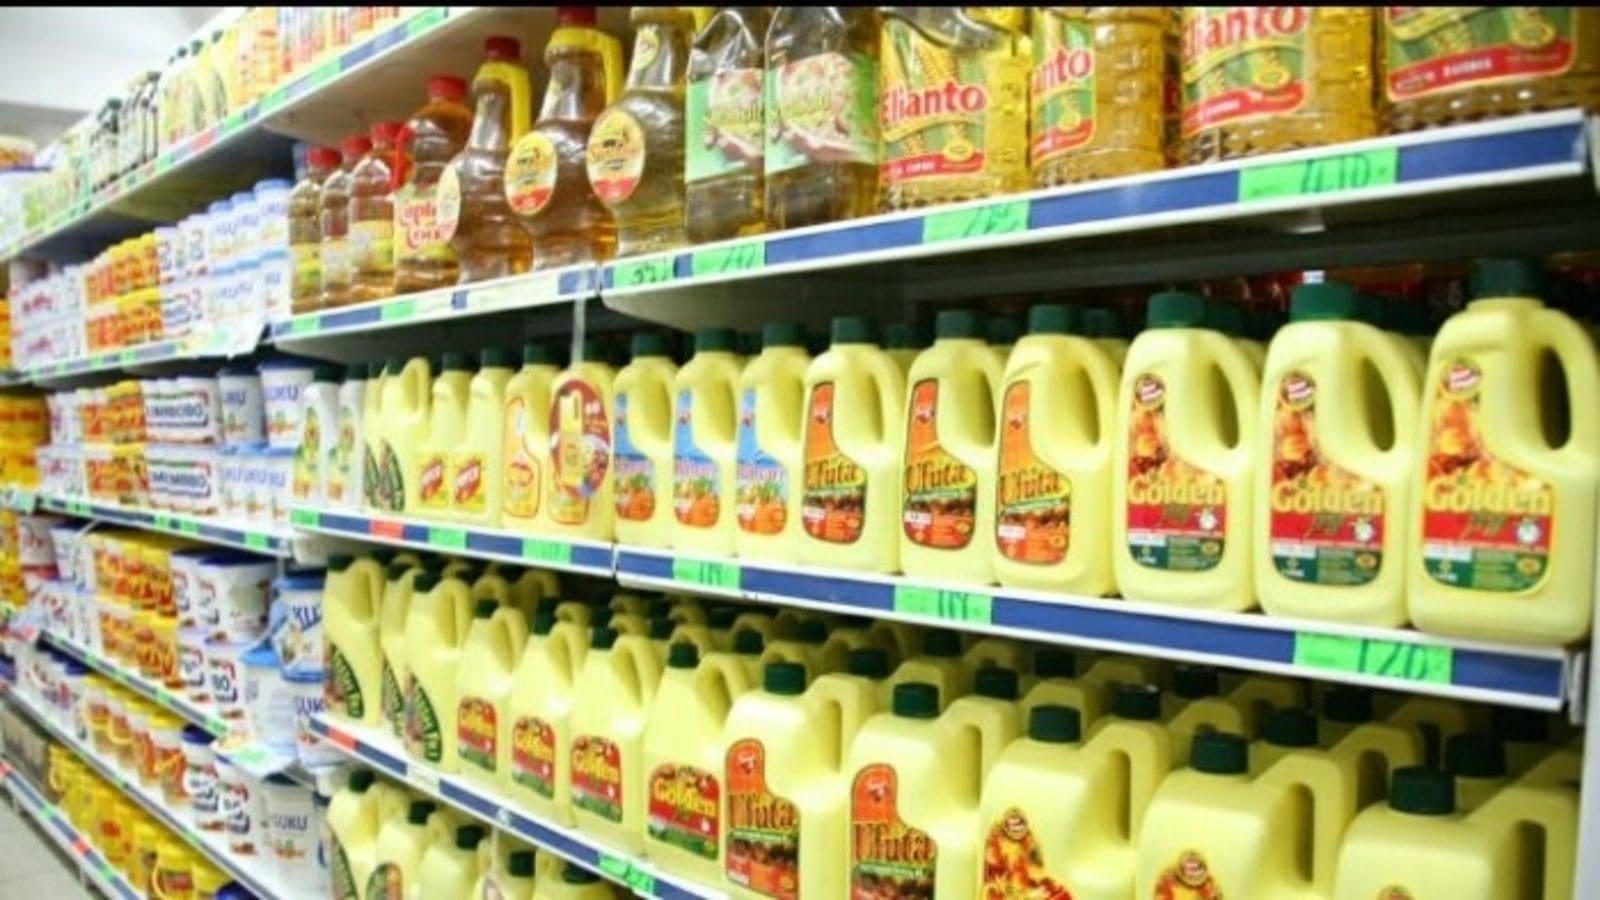 Over 100,000 Kenyan employees in the edible oils sector risk losing their jobs on the backdrop of duty-free imports